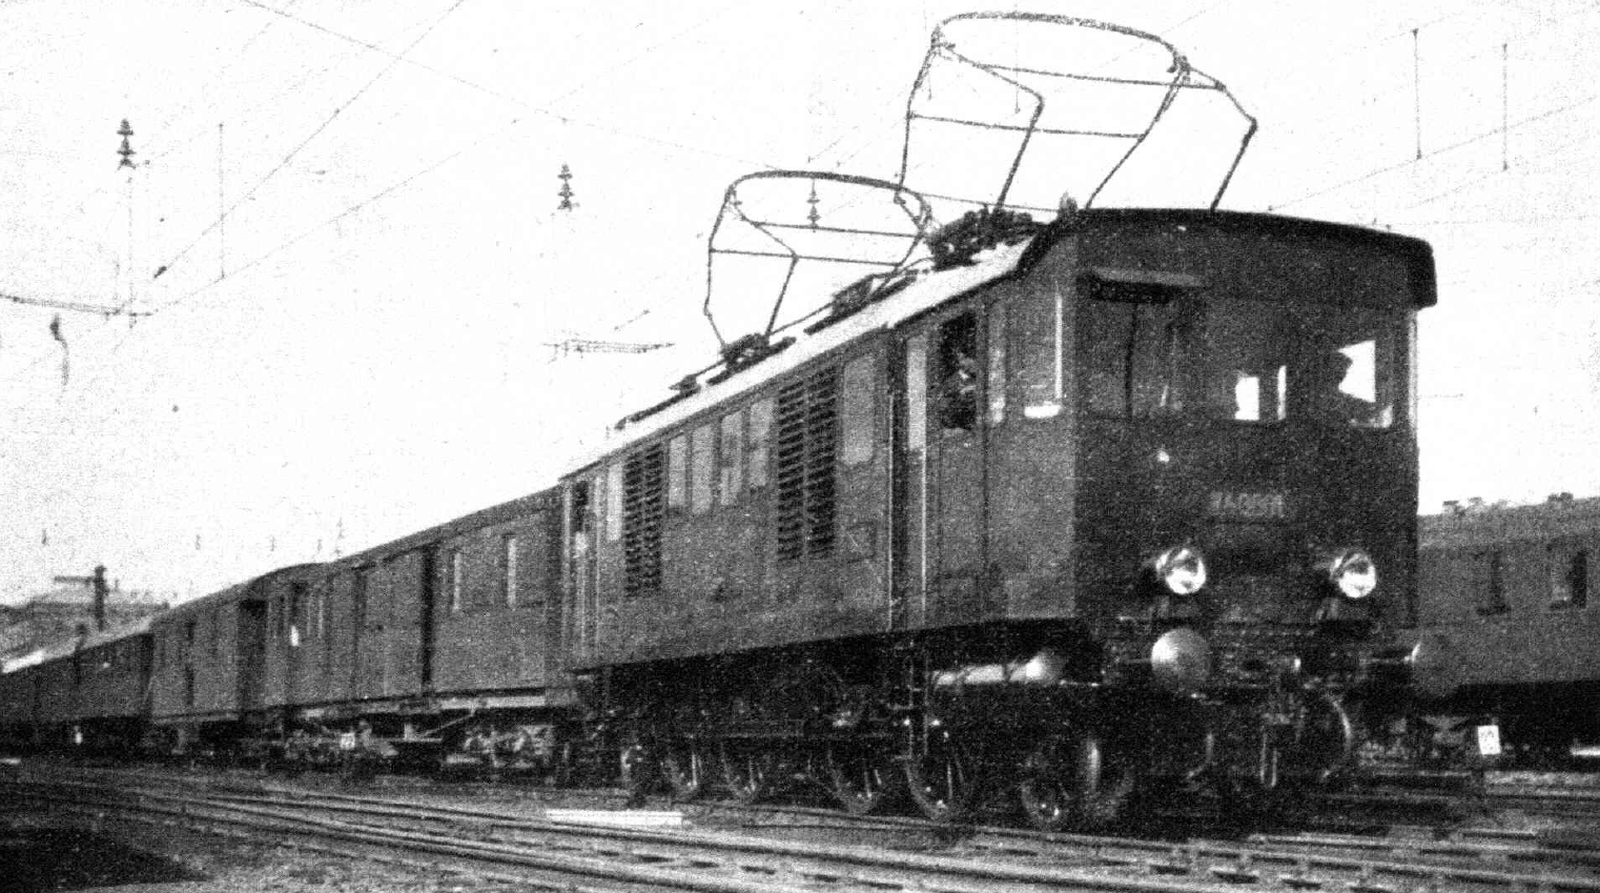 V40.002 with a passenger train